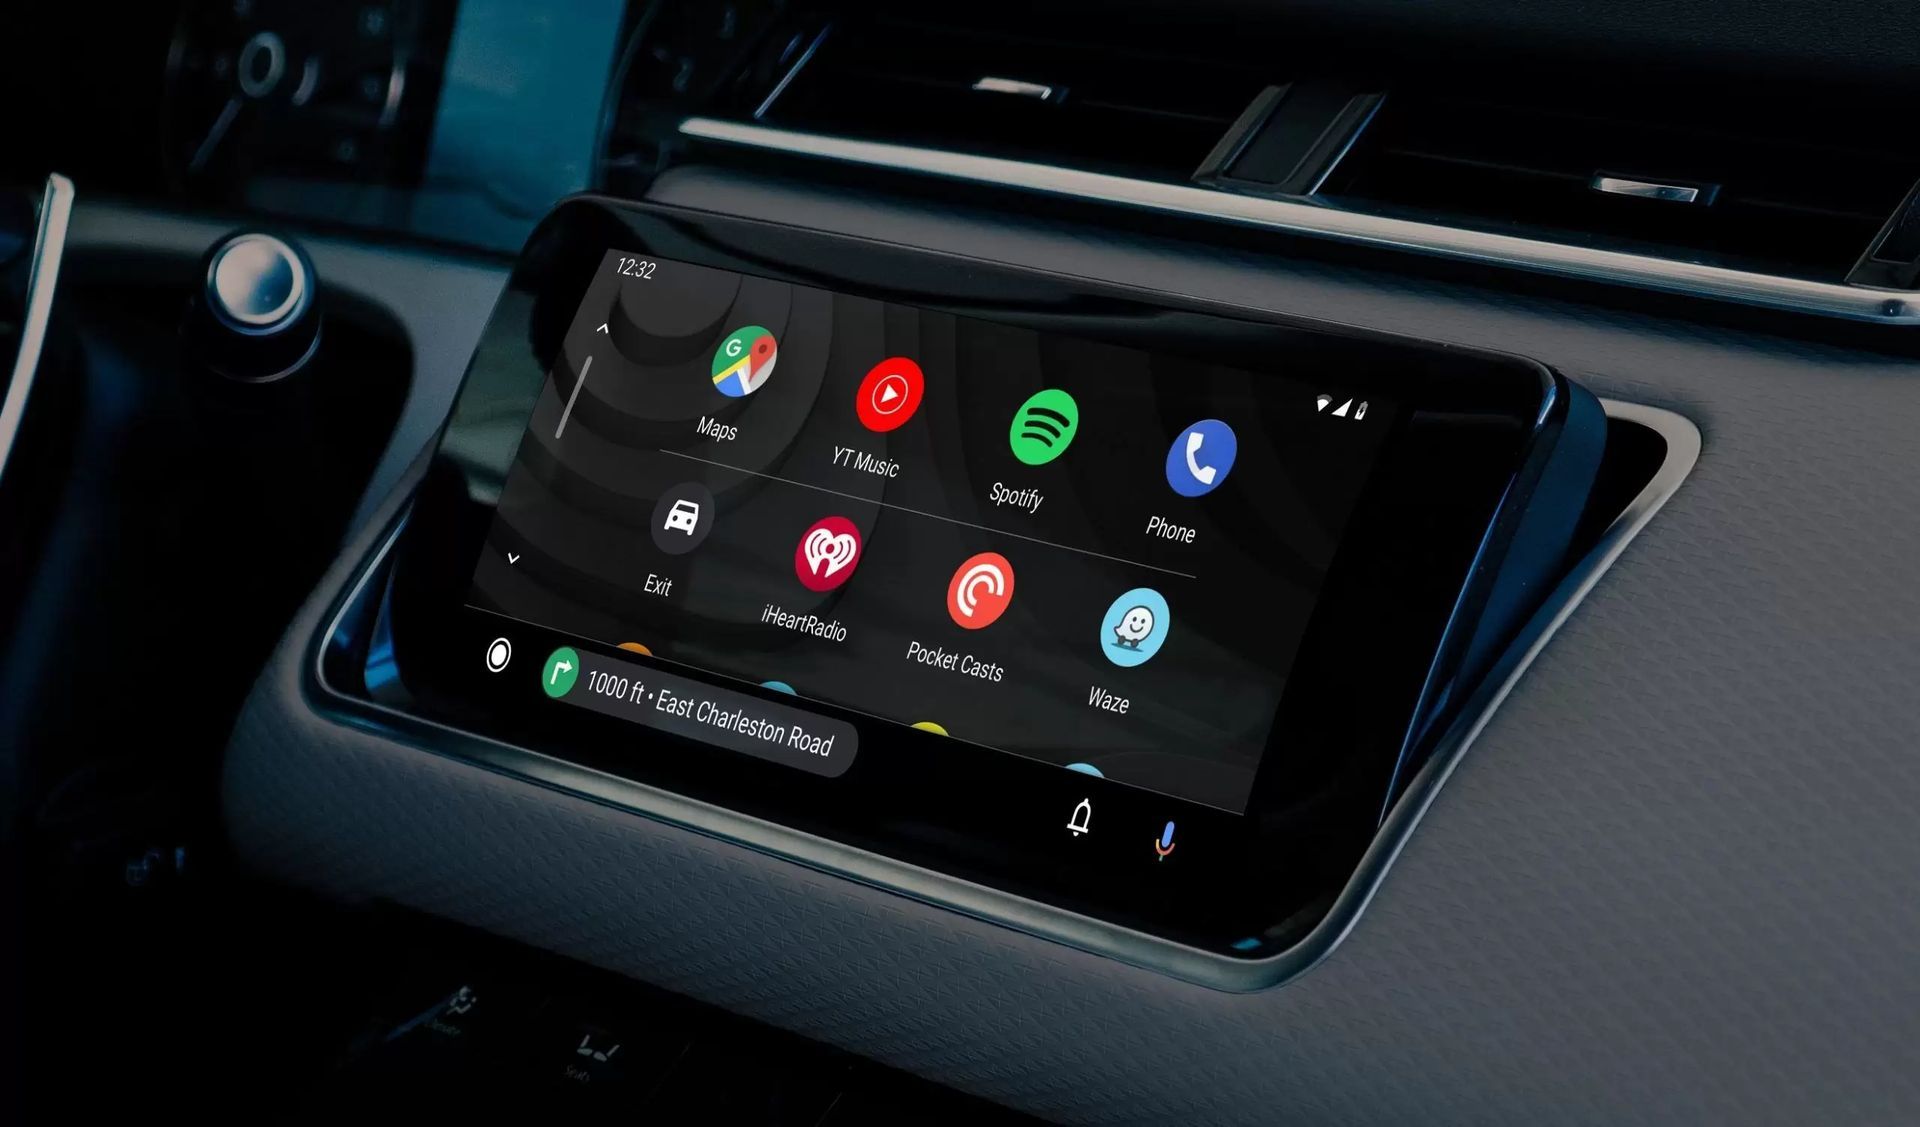 How to get the new Android Auto Update